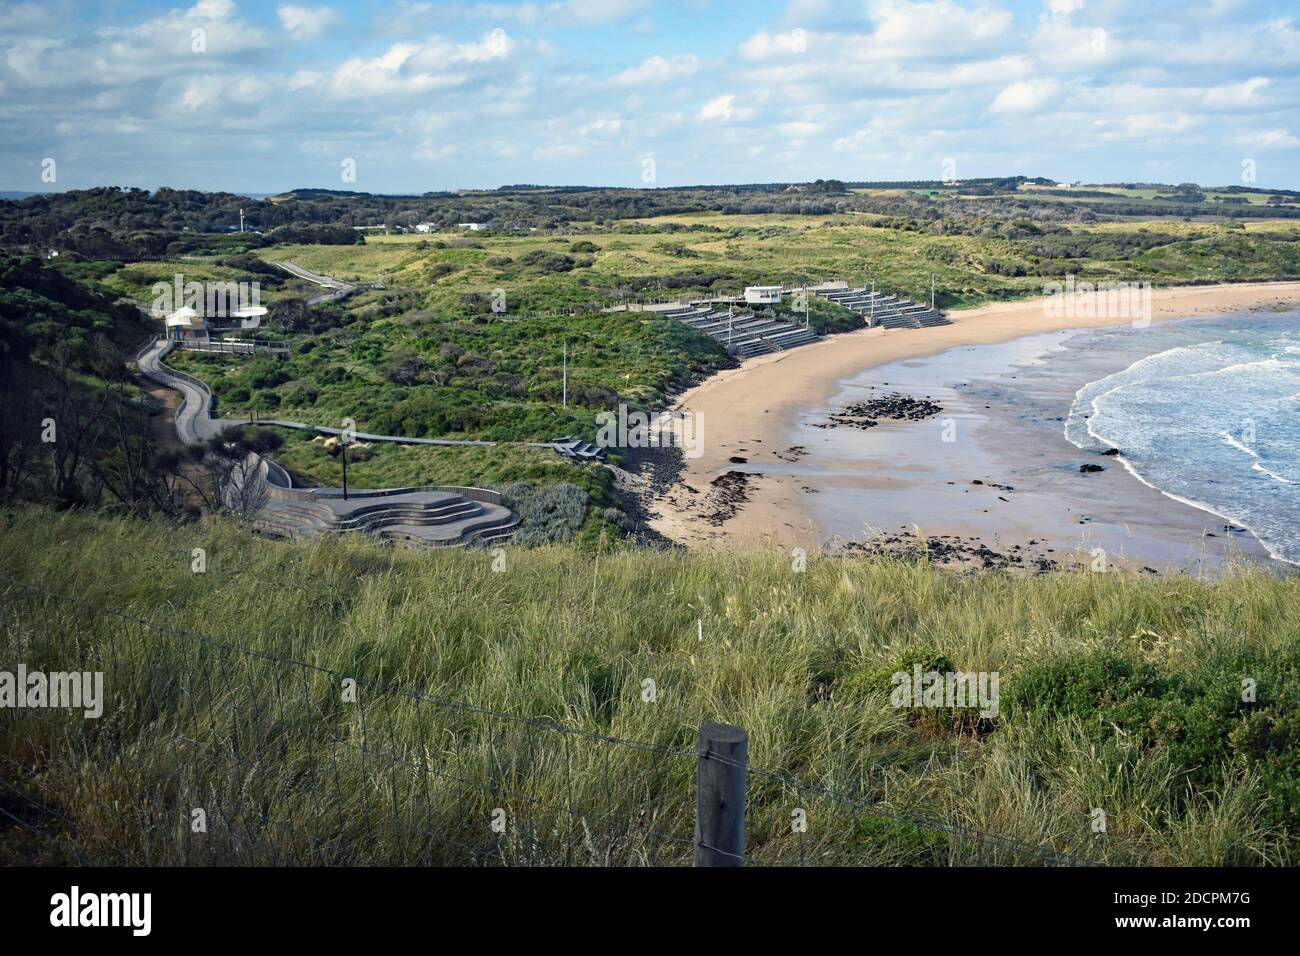 View over Summerland Bay on Phillip Island, Victoria, Australia.   The penguin parade seating area and boardwalks can be seen on the beach below. Stock Photo